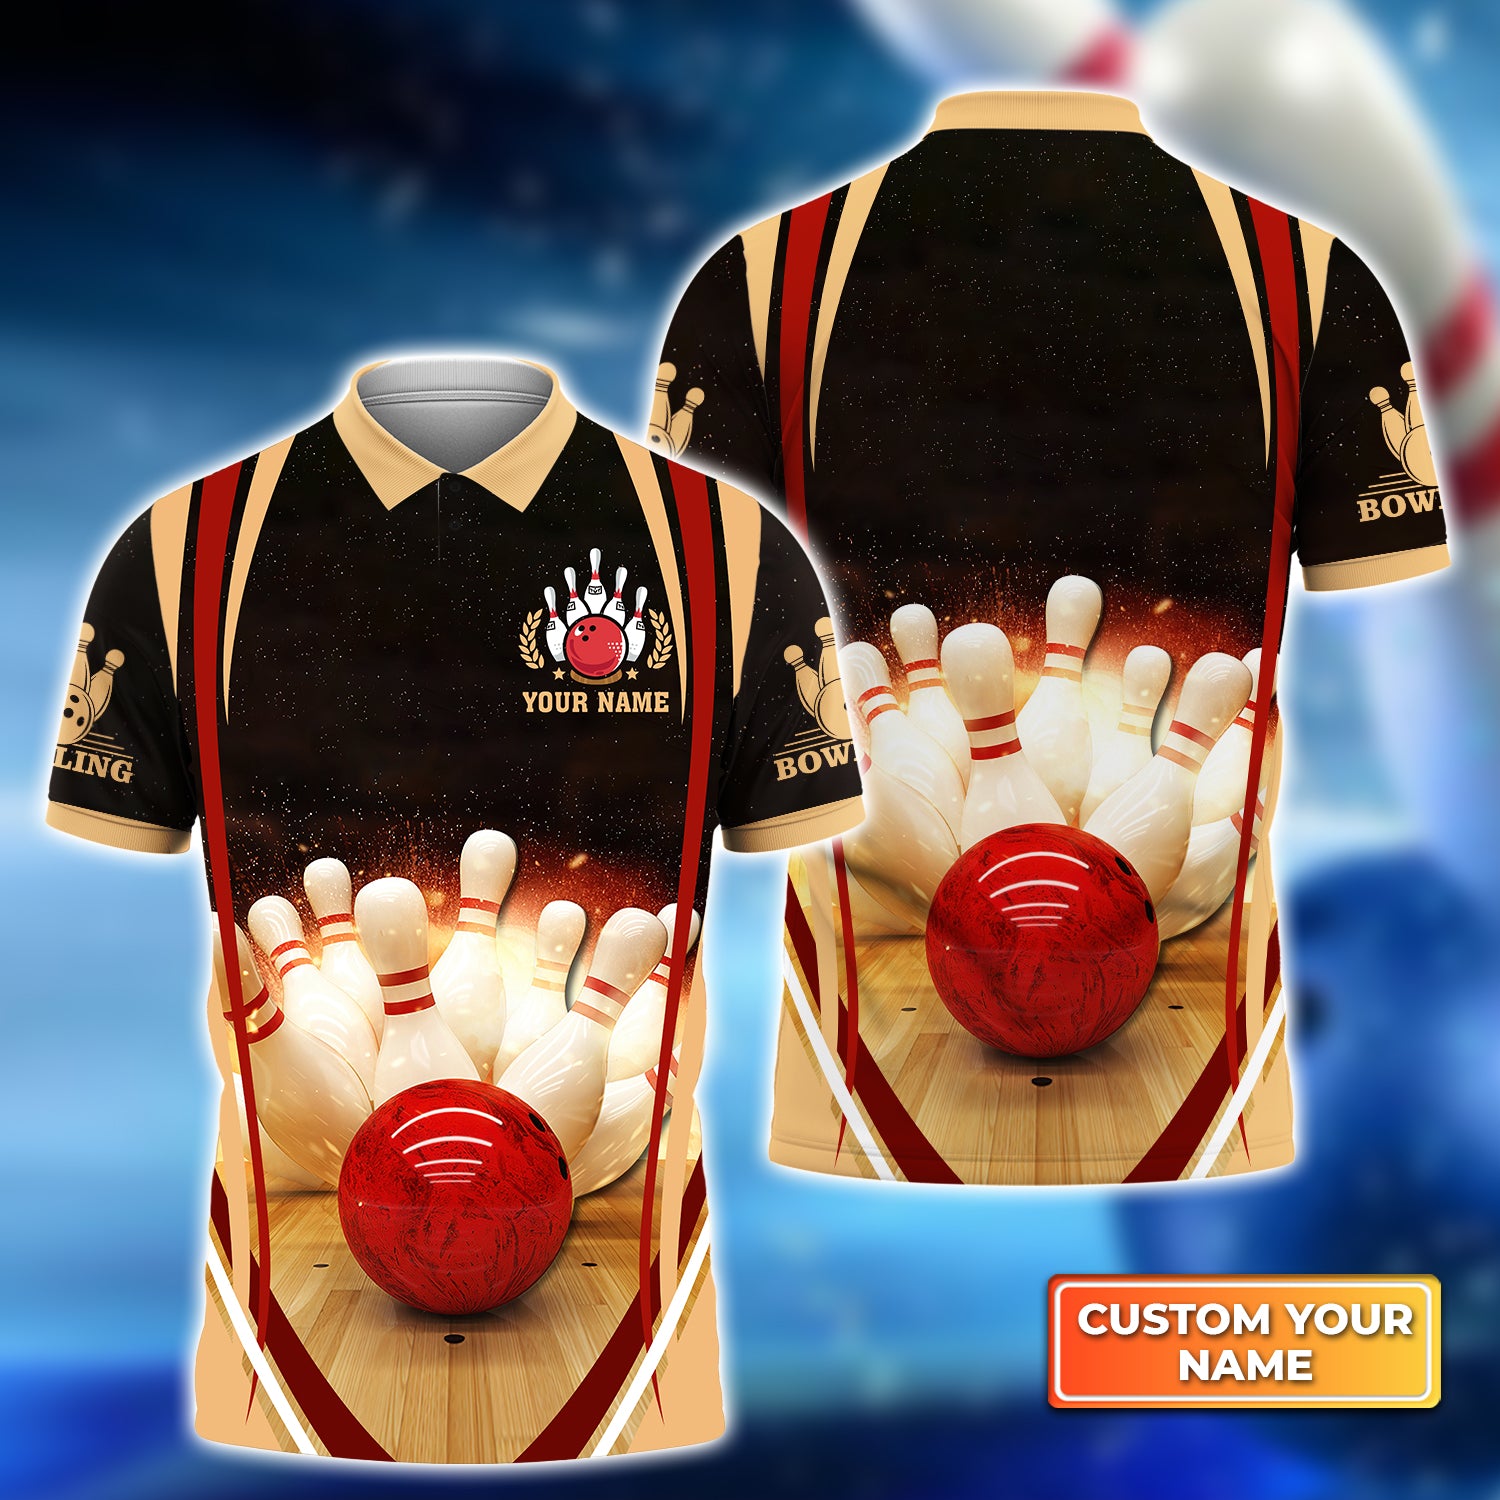 Bowling Strike Hit Fire Explosion Concept Personalized Name 3D Polo Shirt QB95